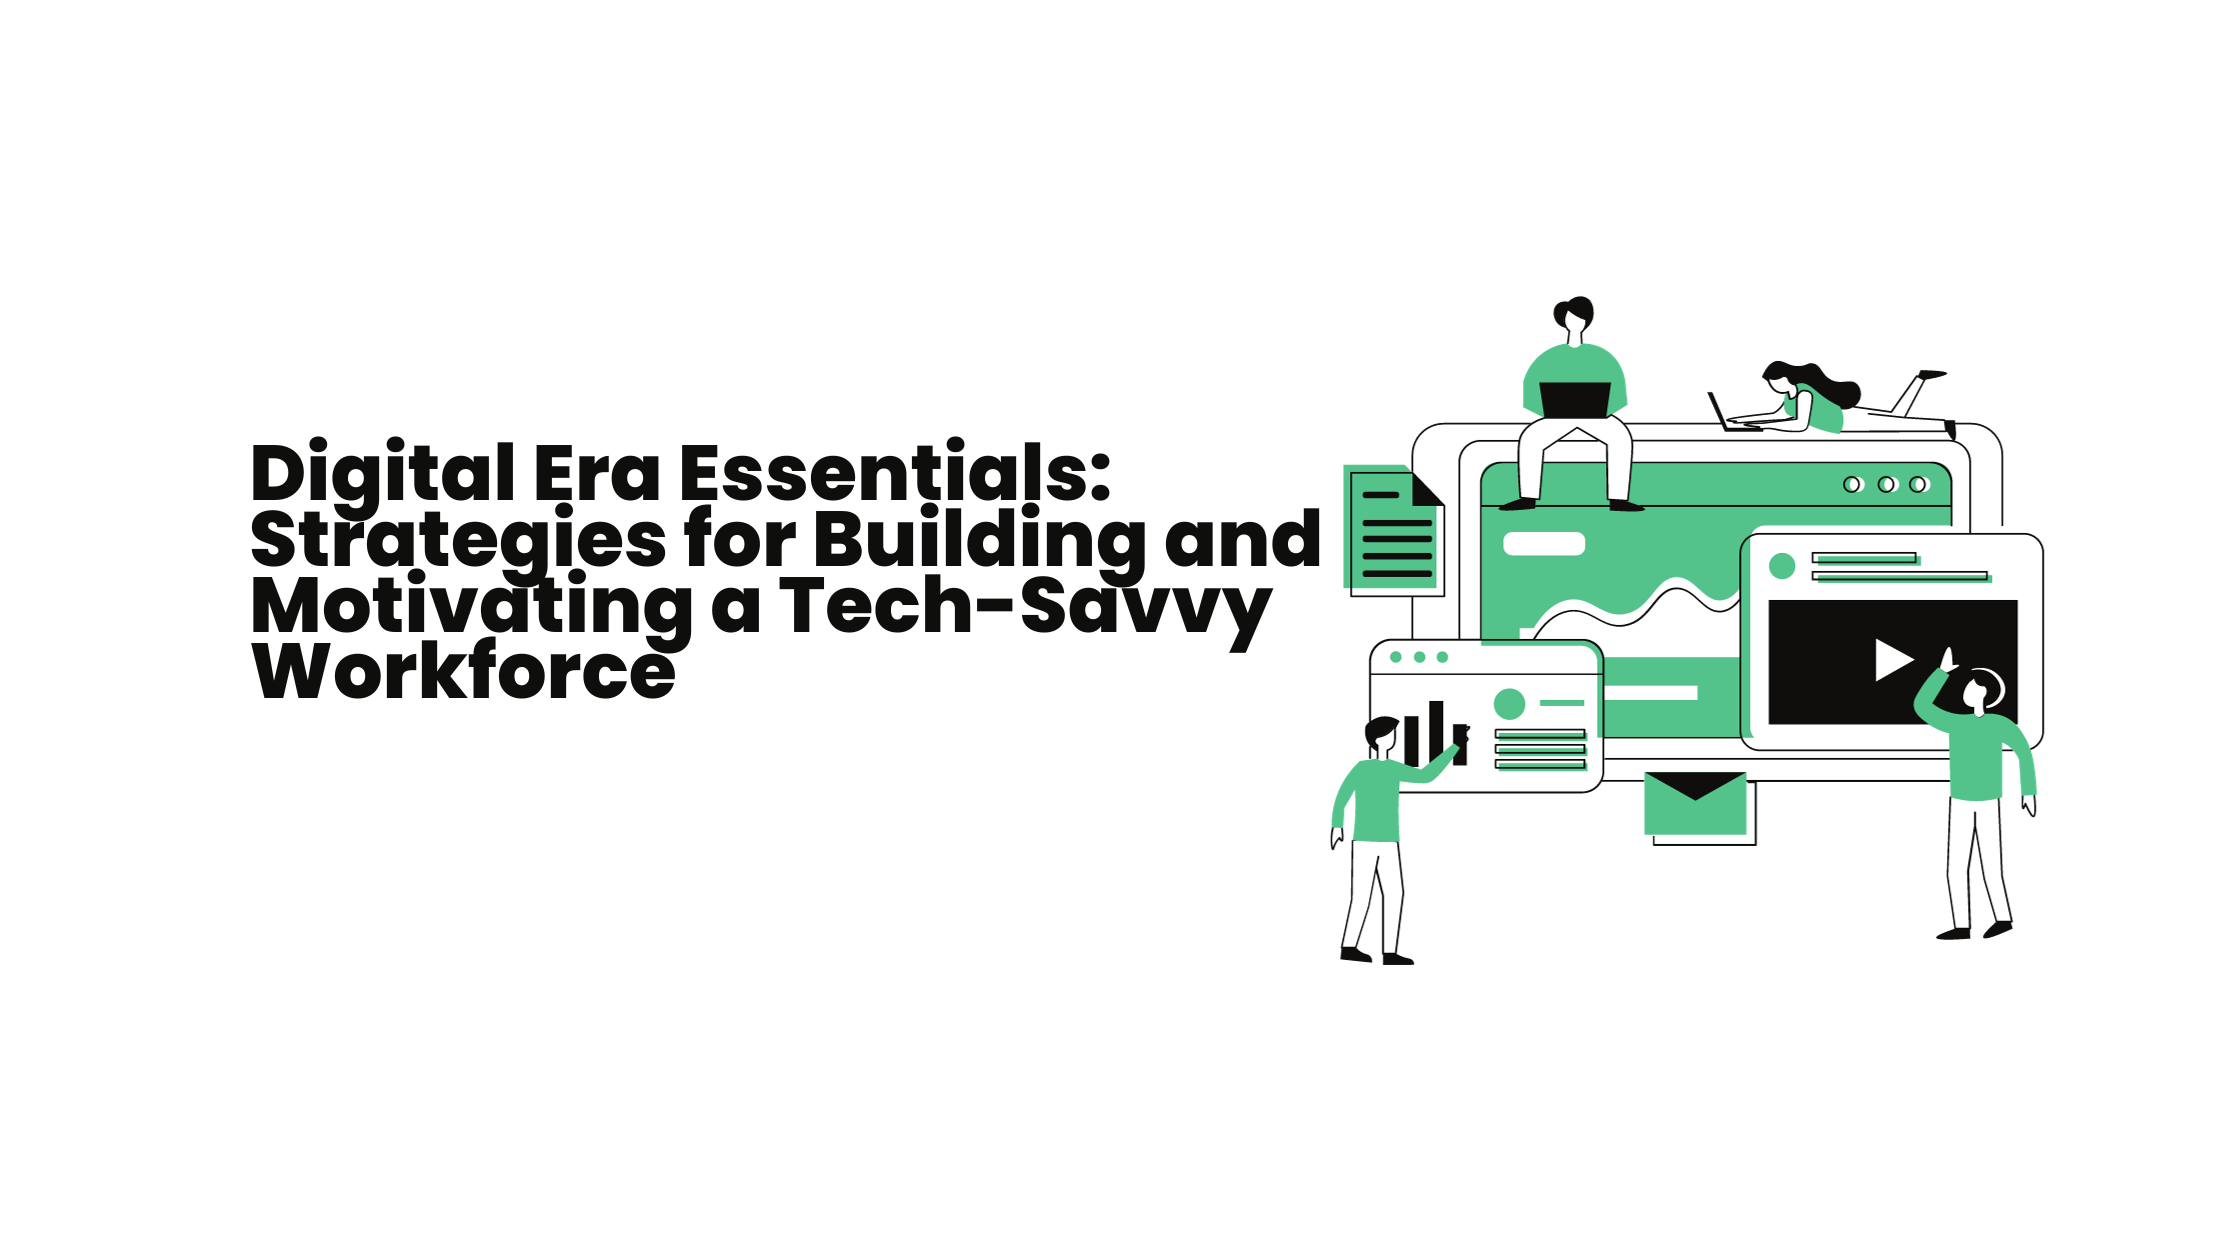 Digital Era Essentials Strategies for Building and Motivating a Tech-Savvy Workforce